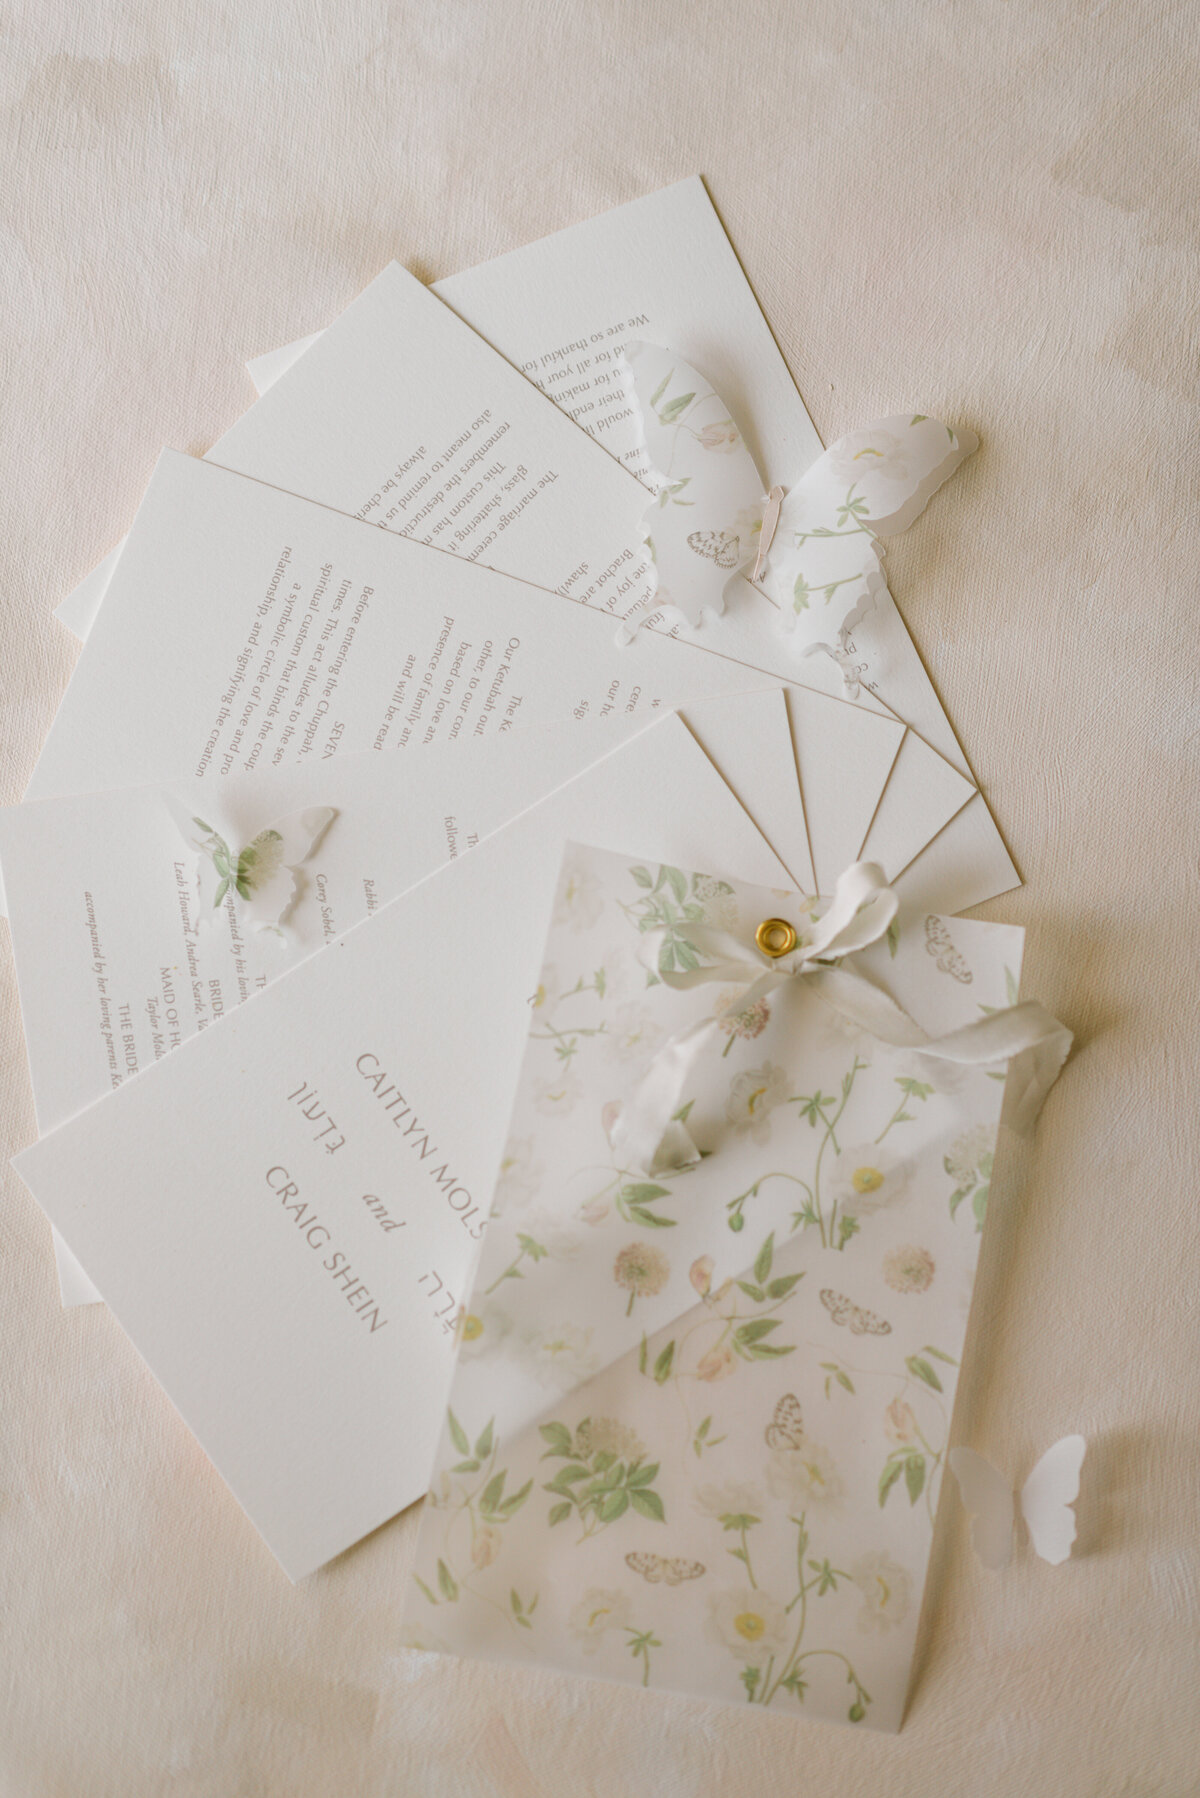 Cottage Core Wedding Style with Peach and Green Colour Palette, Floral Vellum Wedding Program, Wedding Stationery